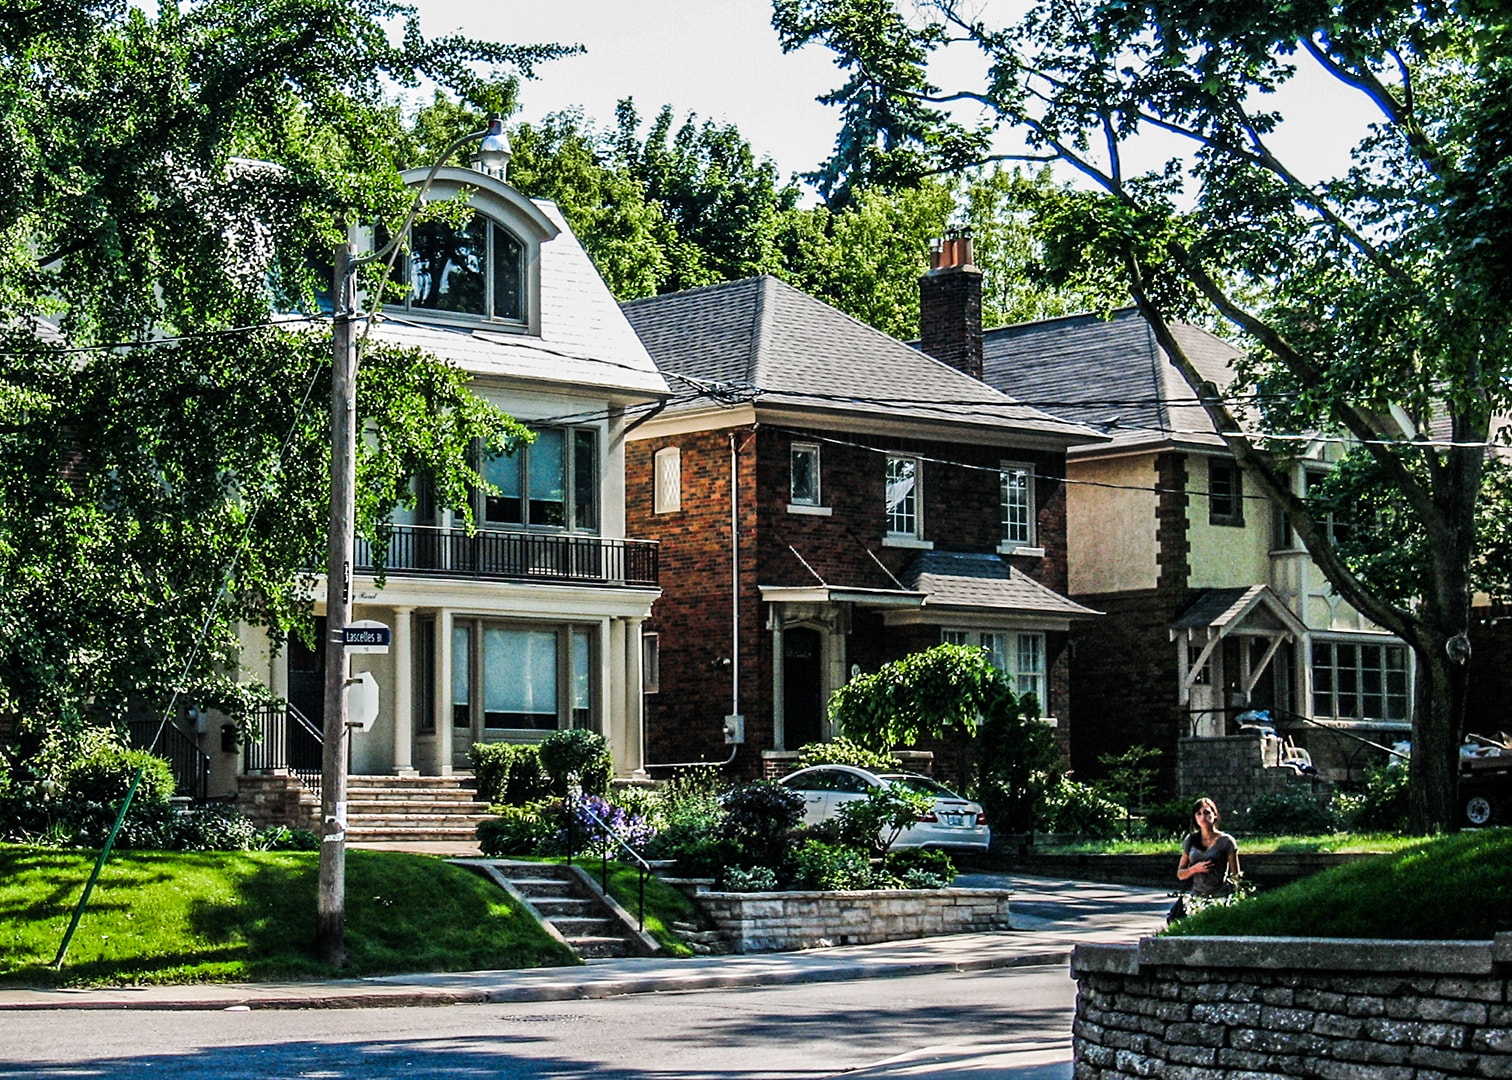 Toronto Homeowners List Detached Homes For Sale At A Record Pace